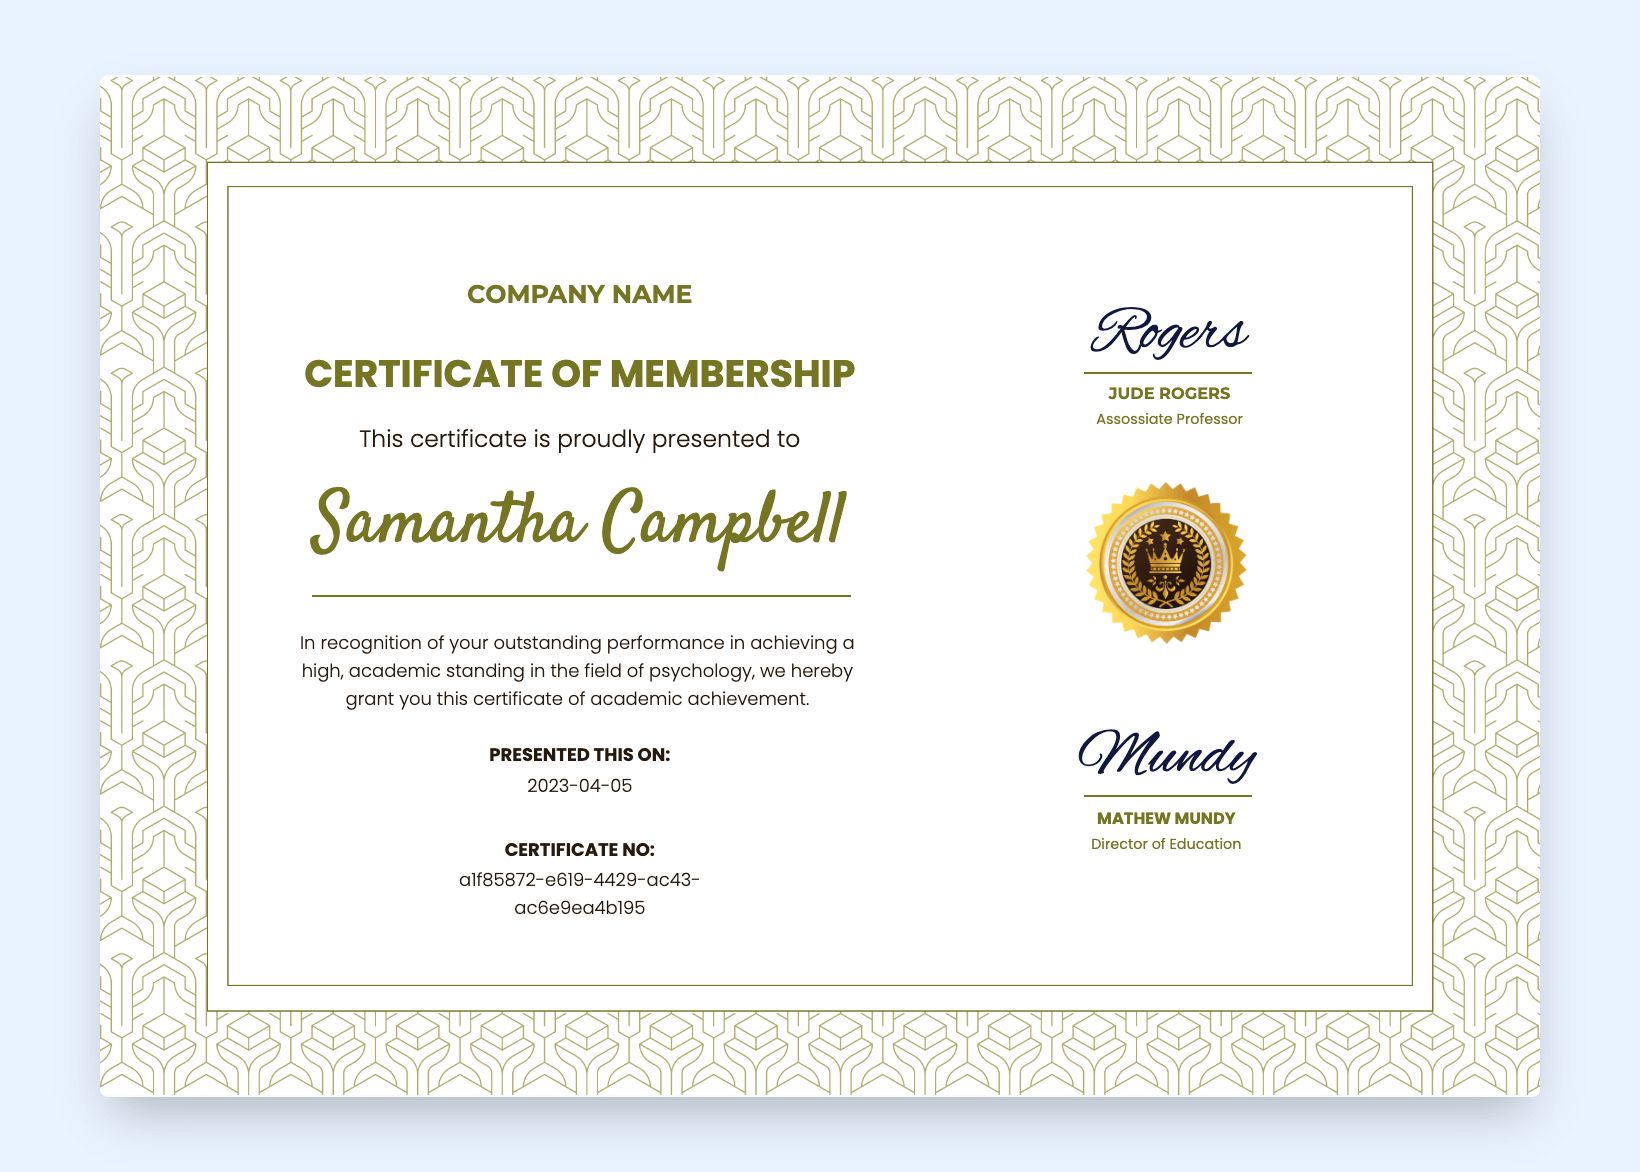 Certificate of membership template with patterns.